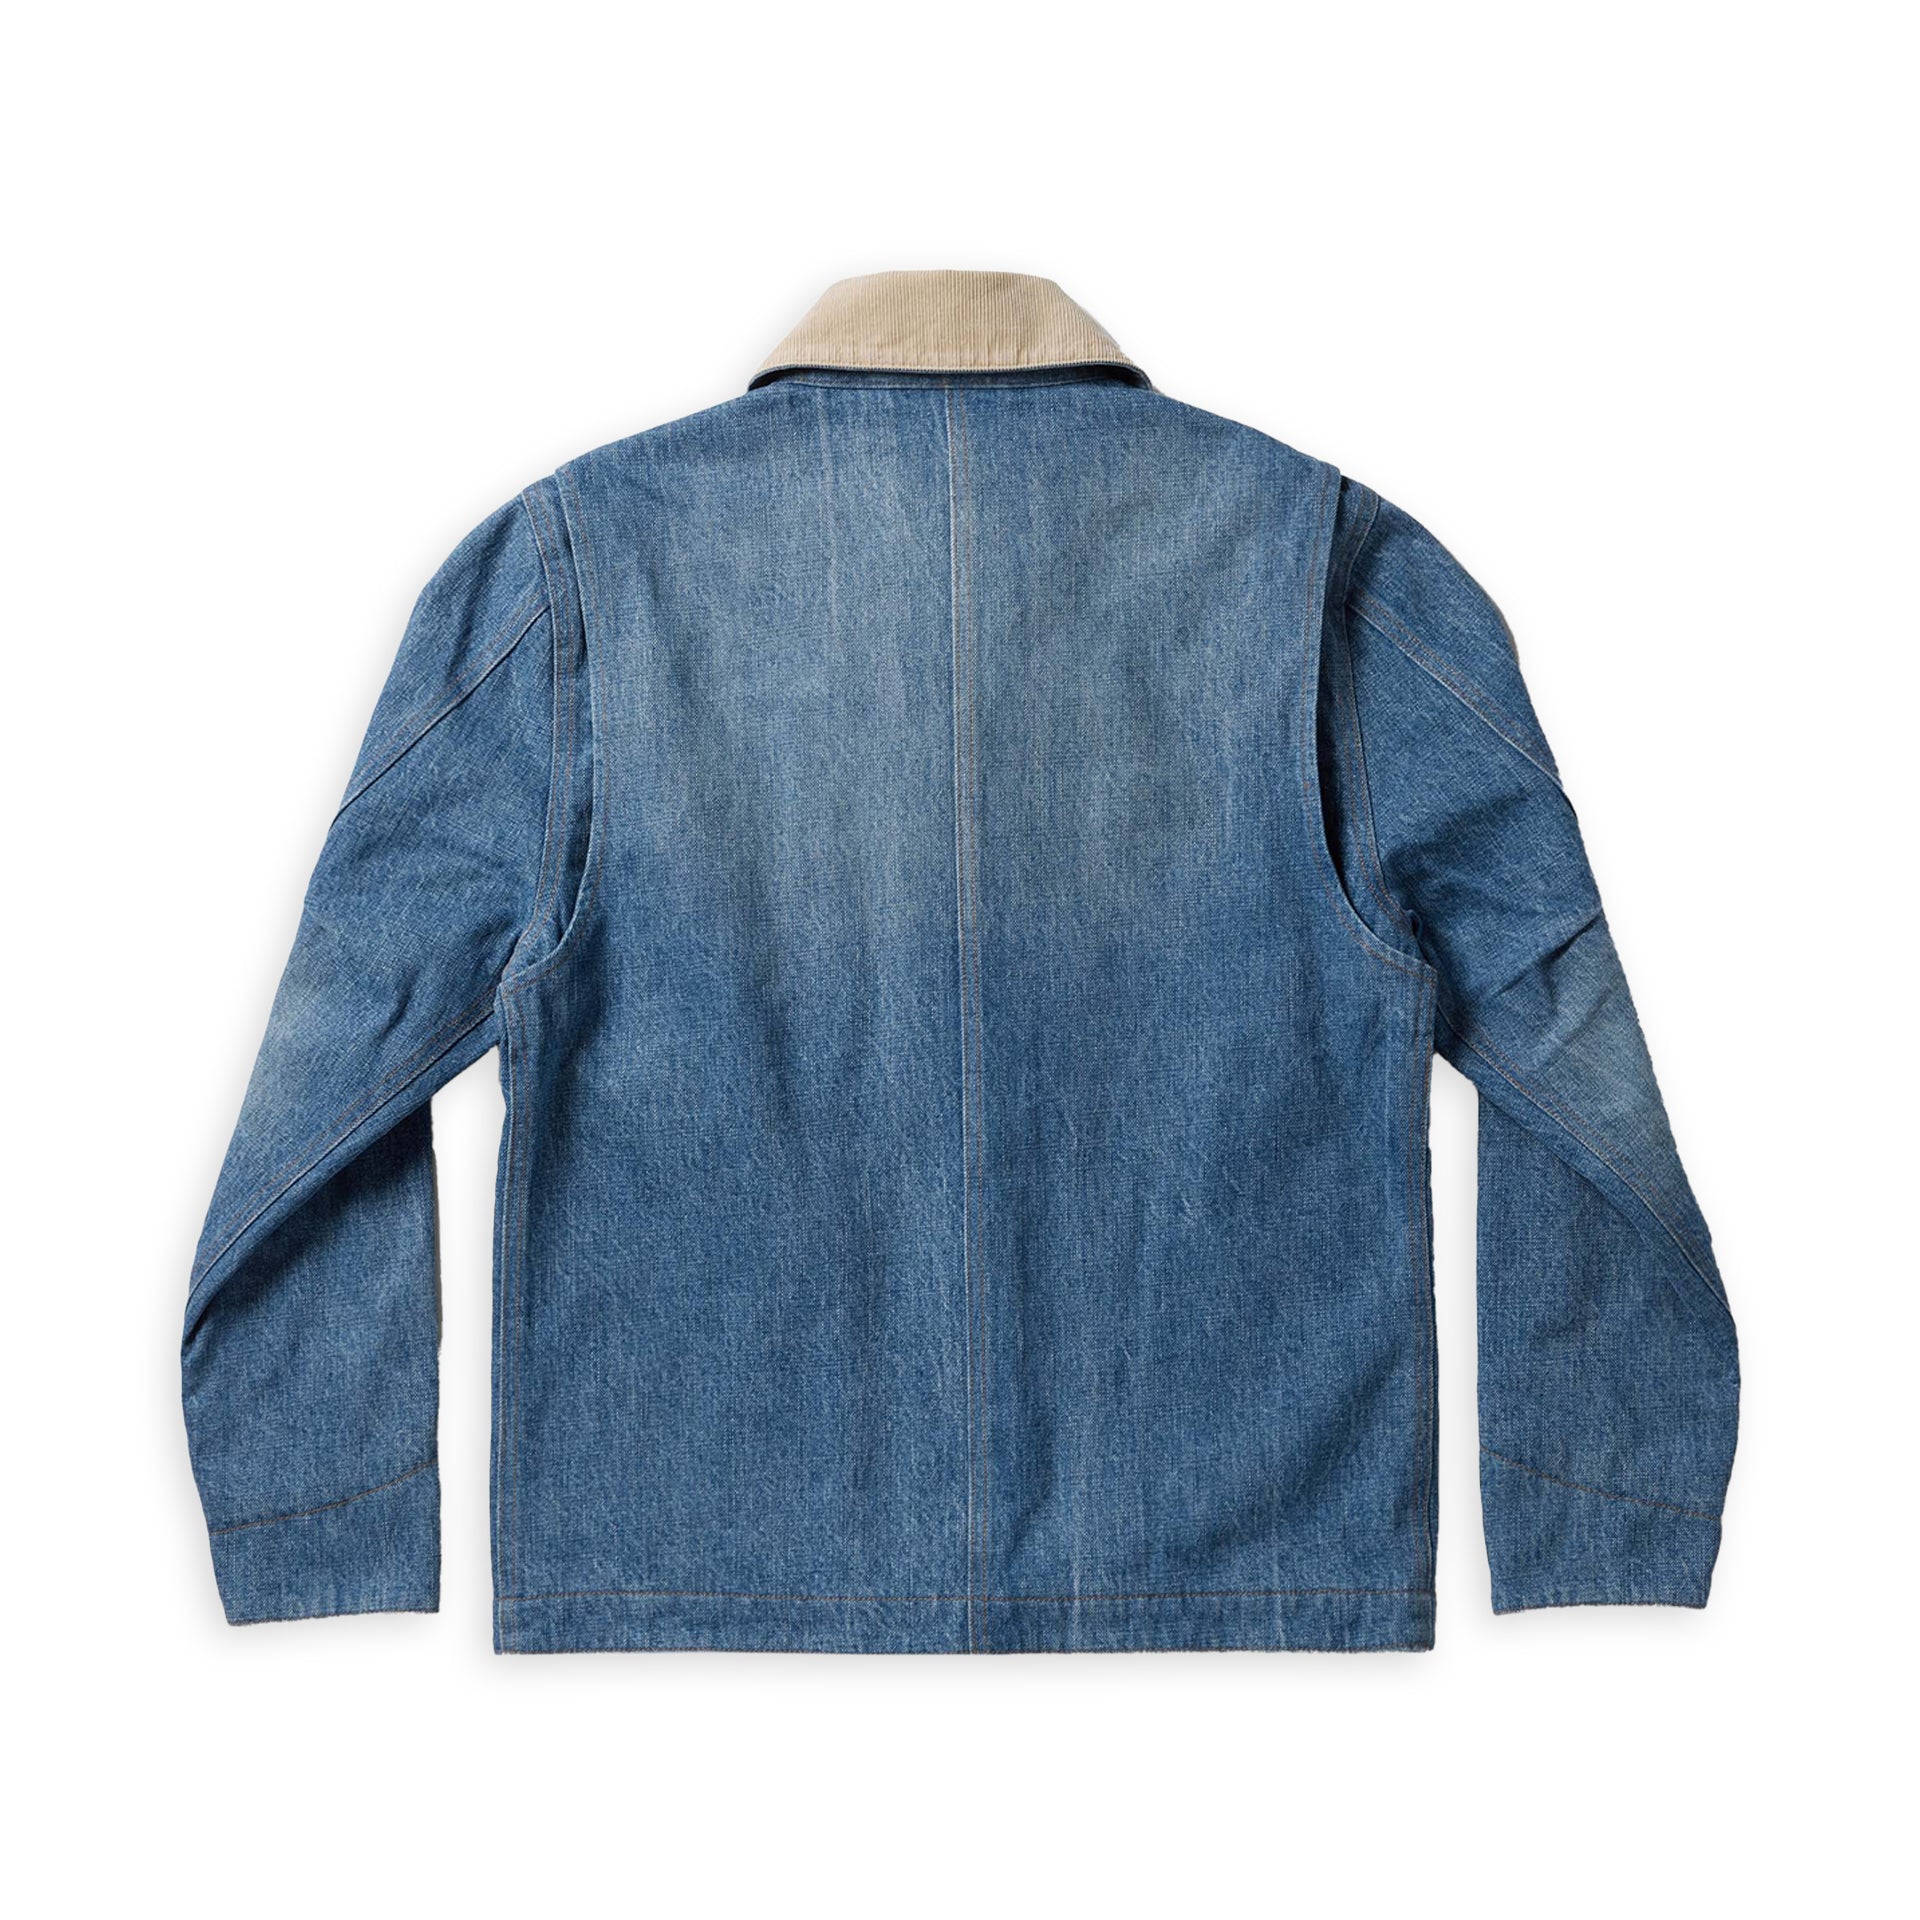 Taylor Stitch Selvage Workhorse Jacket | Uncrate Supply